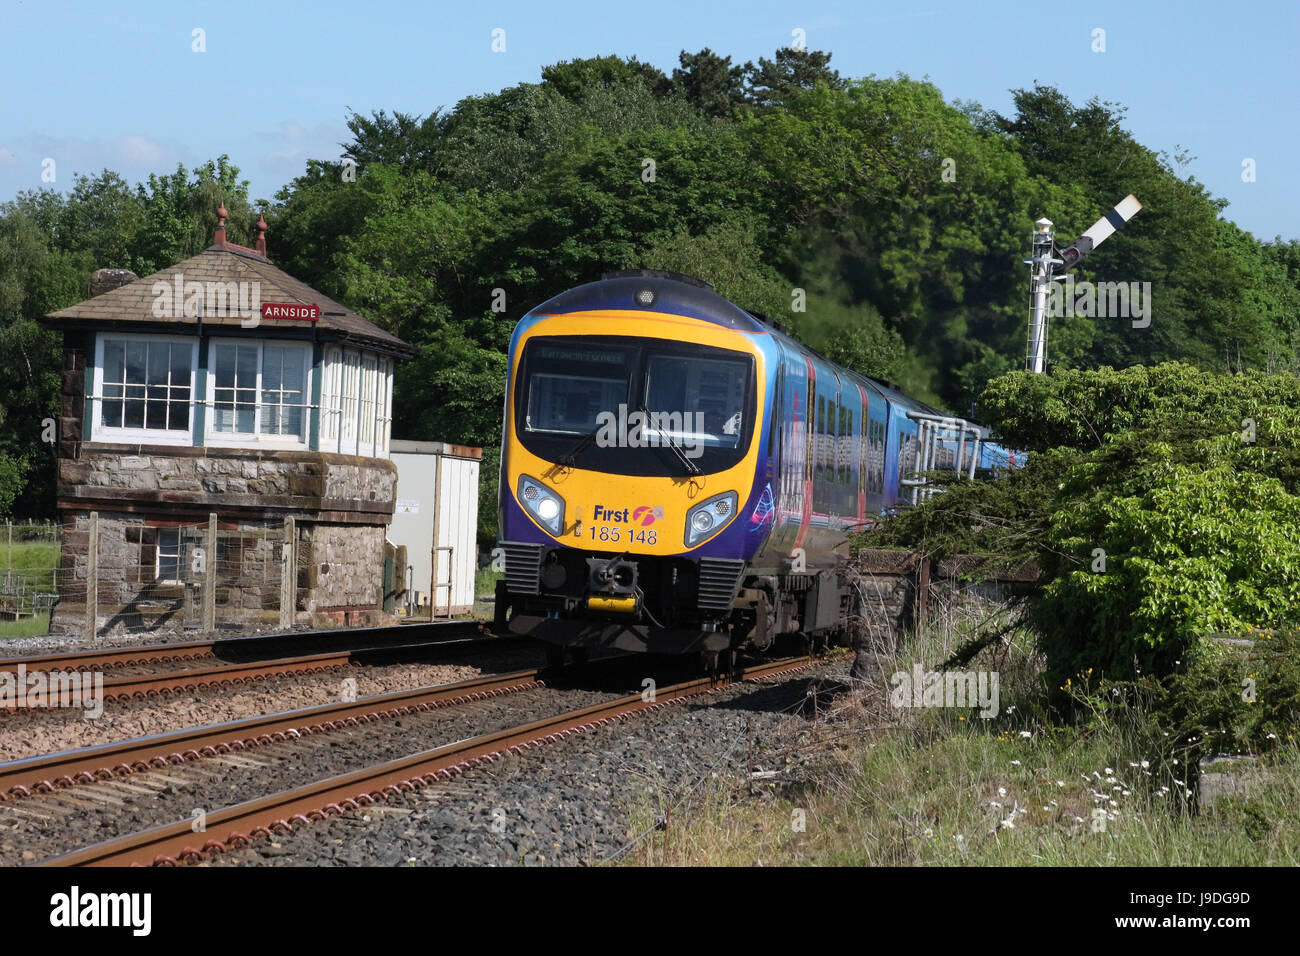 Siemens Desiro diesel multiple unit train in First Transpennine Express livery leving Arnside railway station past a semaphore signal and signalbox. Stock Photo